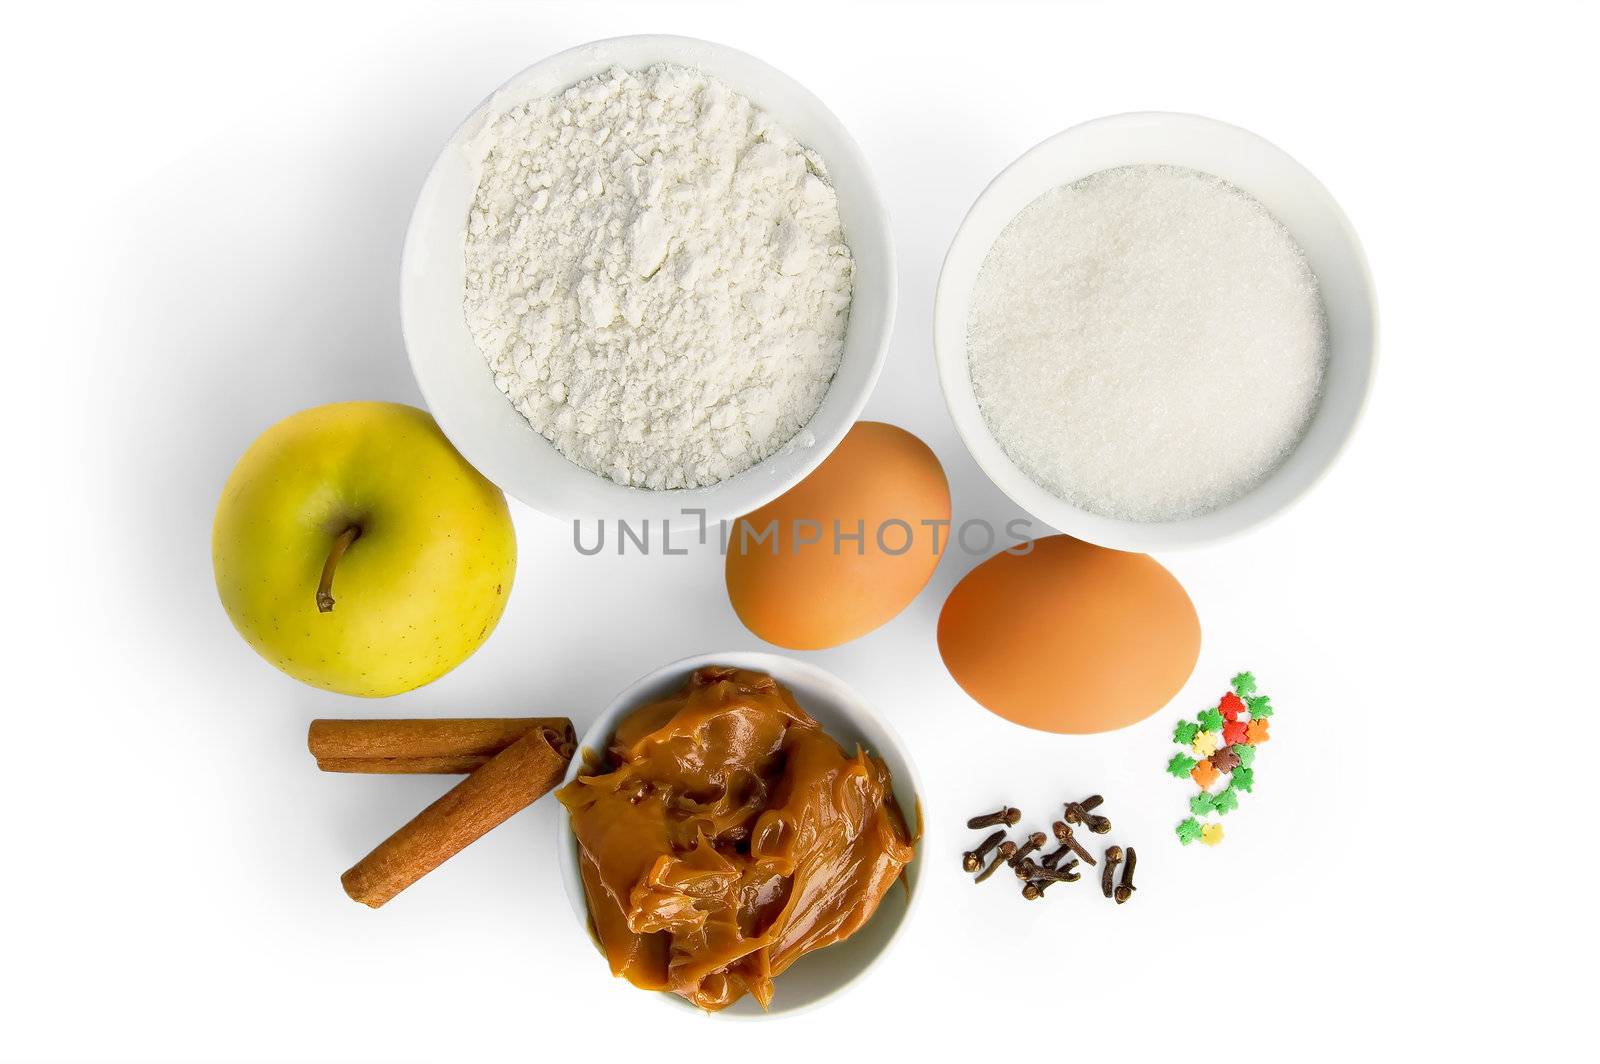 Flour, sugar, condensed milk boiled in a cup, apple, two cinnamon sticks, cloves corn, two eggs and colorful spreading to decorate cakes in isolation on a white background